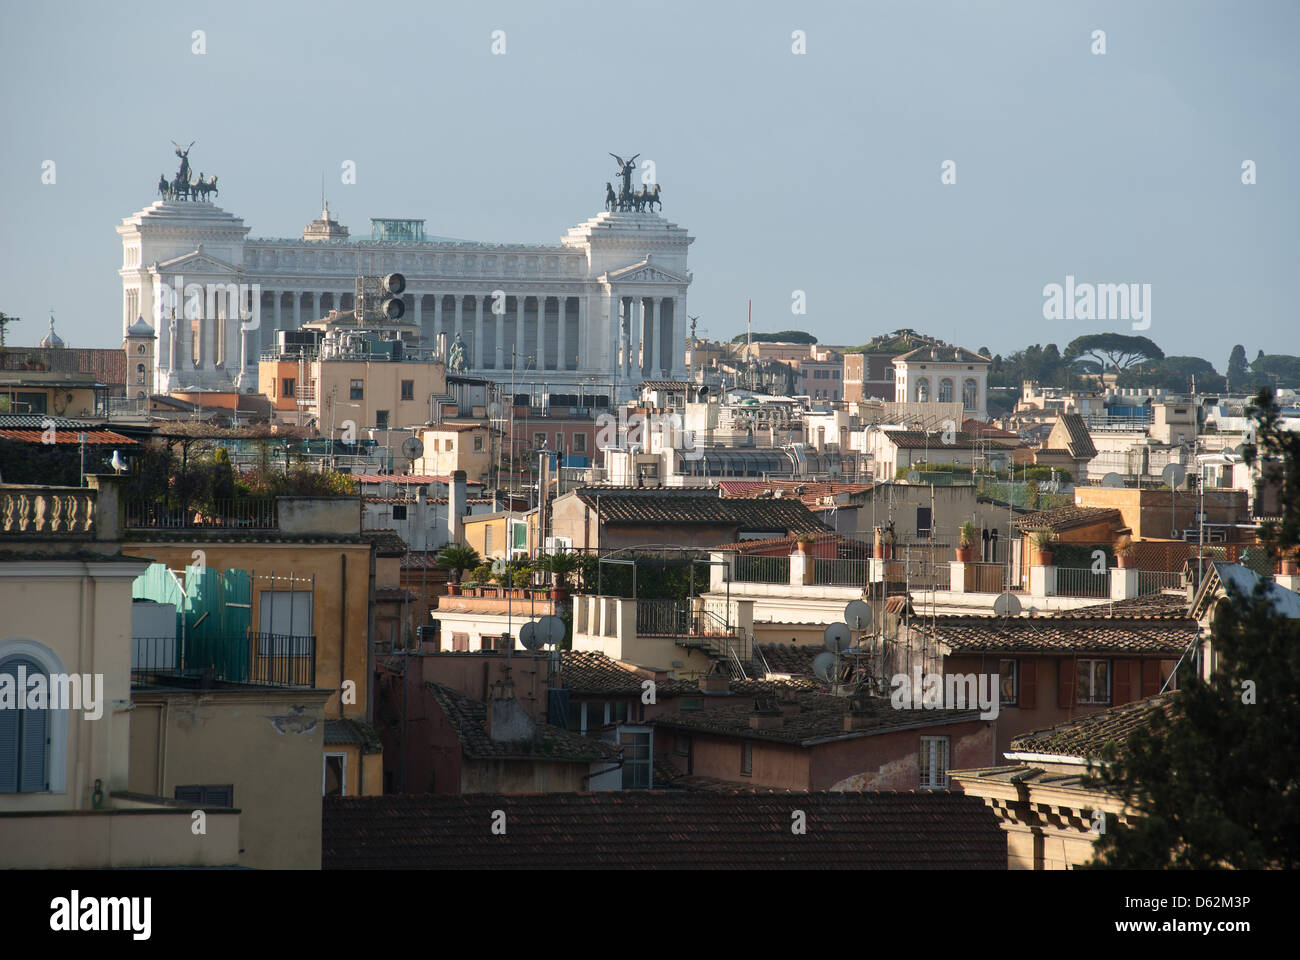 ROME, ITALY. A rooftop view of the city looking towards the Vittorio Emanuele Monument (Vittoriano). 2013. Stock Photo